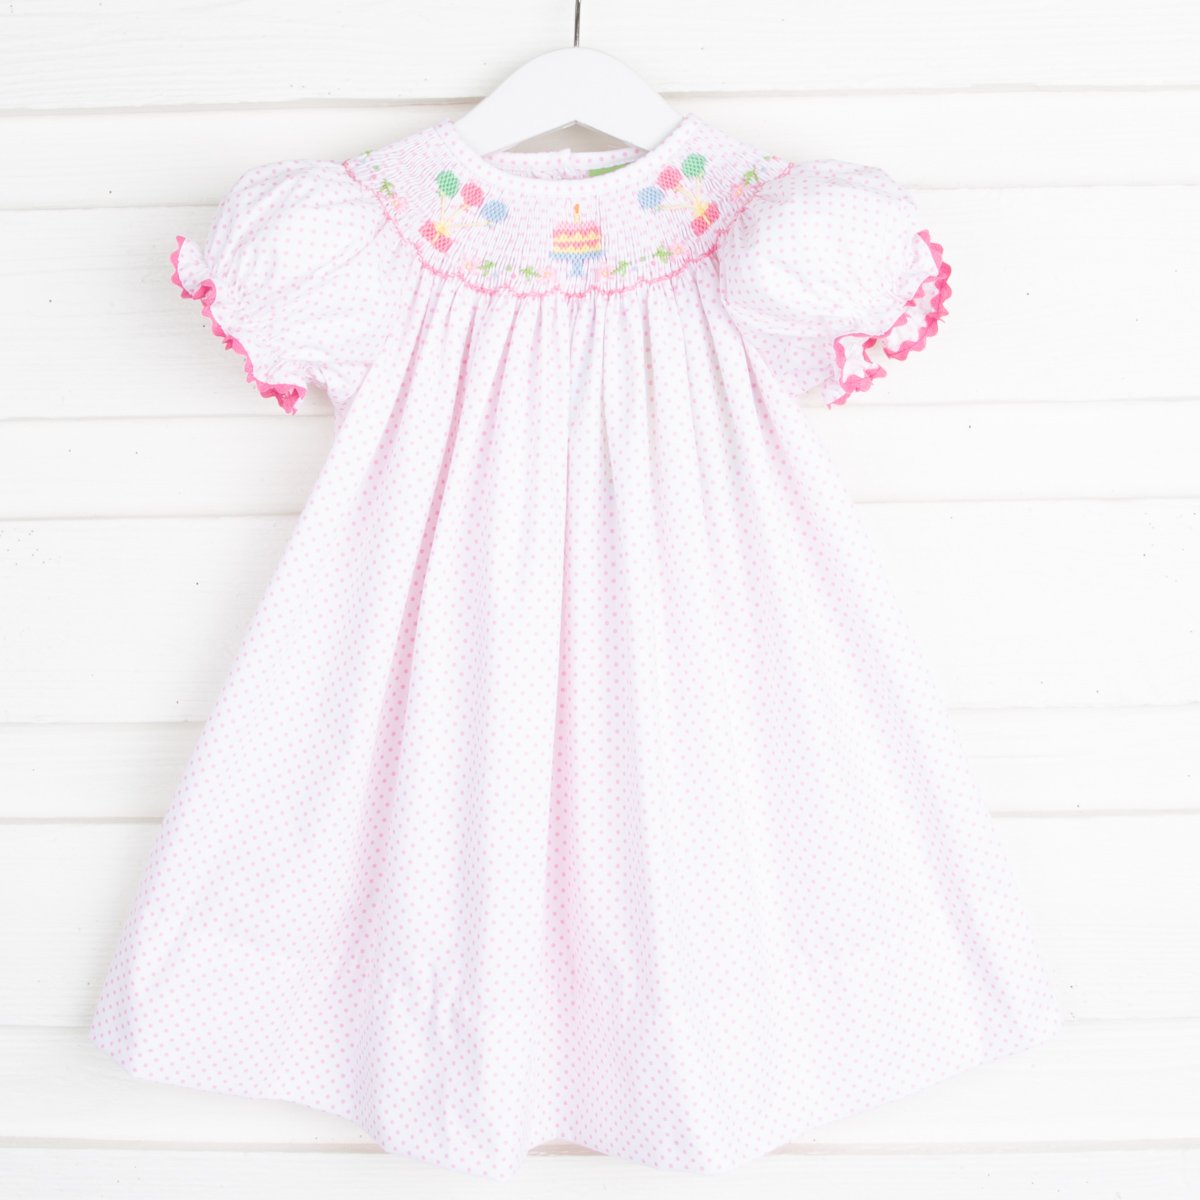 Birthday Party Smocked Pink Dotted Dress